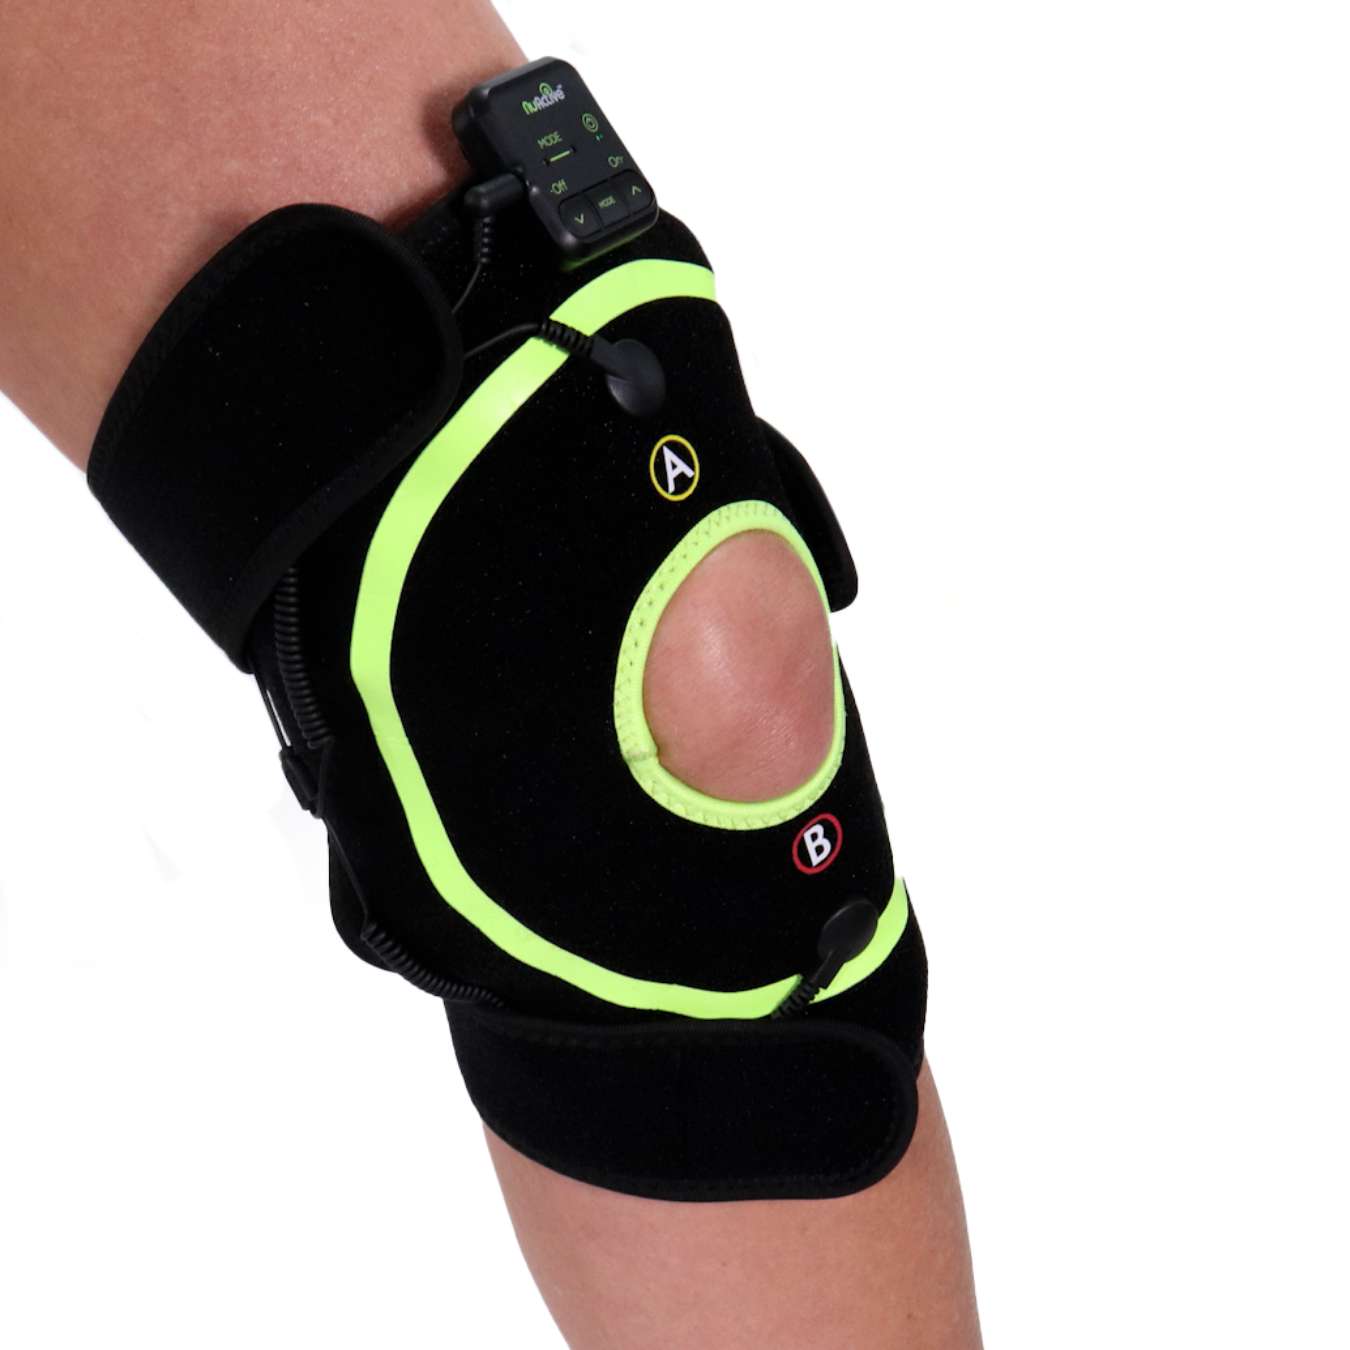 View NuActive EMS Knee Trainer Massager information